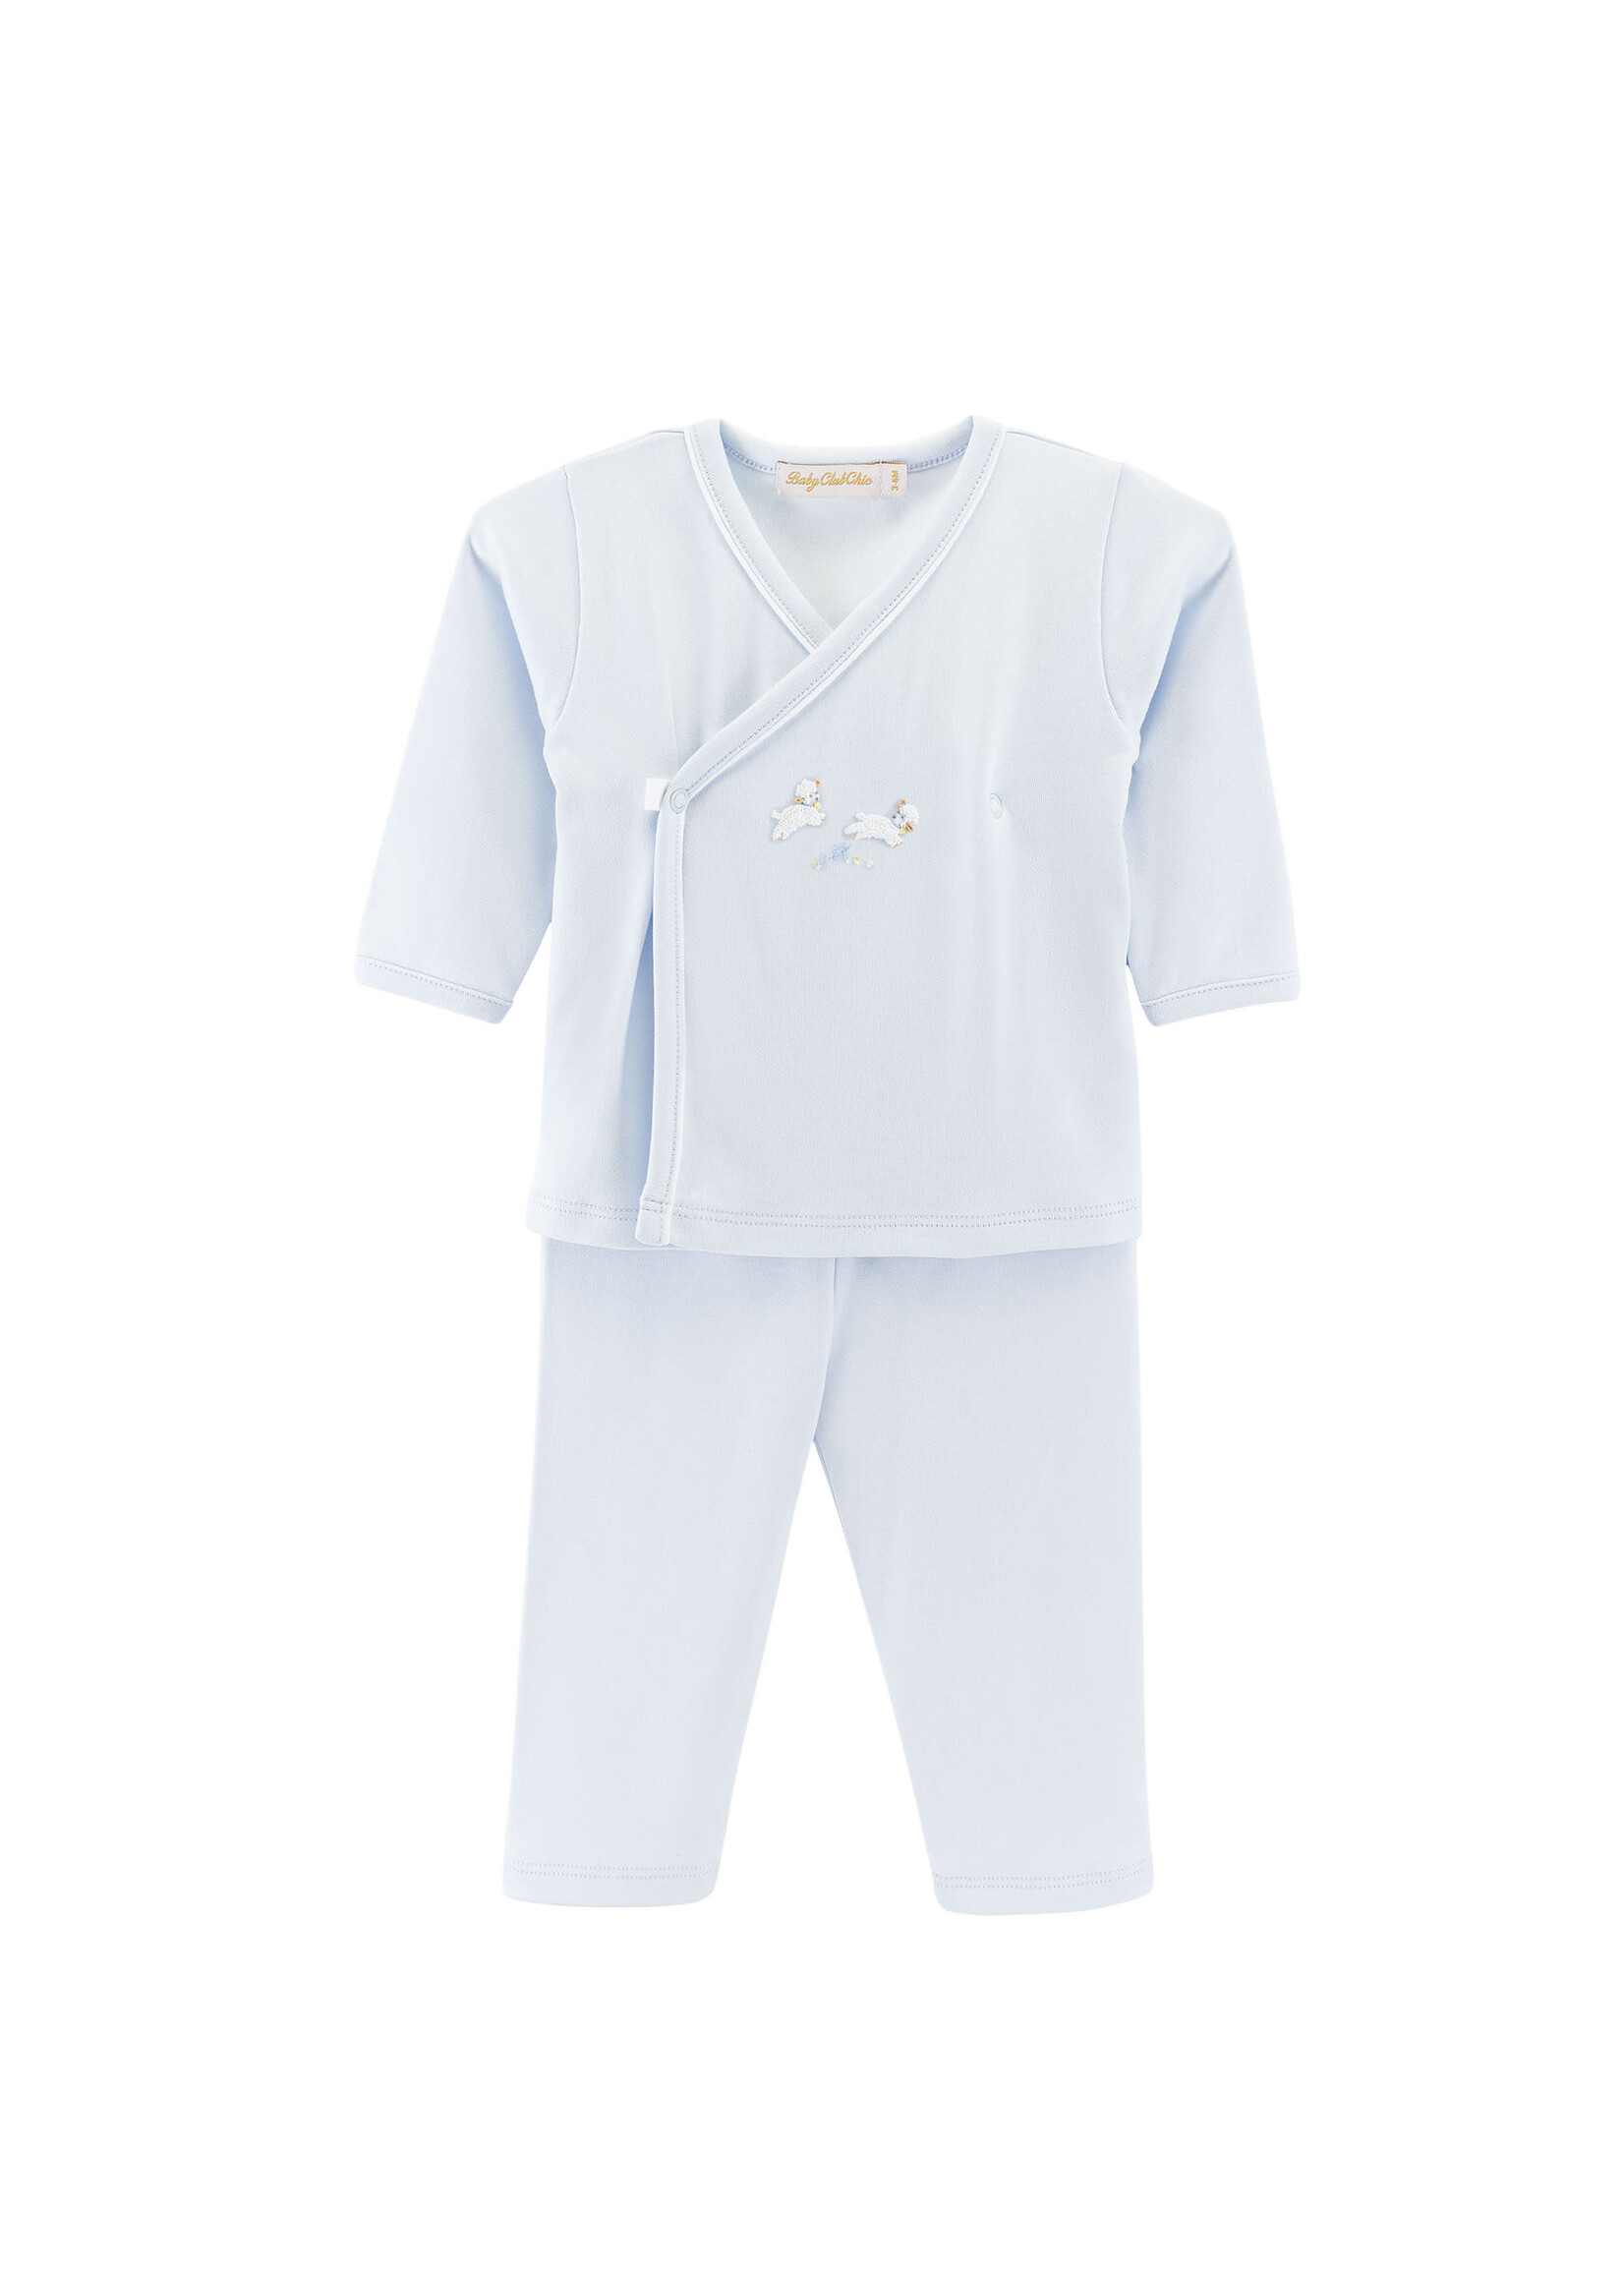 Baby Club Chic Baby Lambs Blue Embroidered Shirt/Pants Set